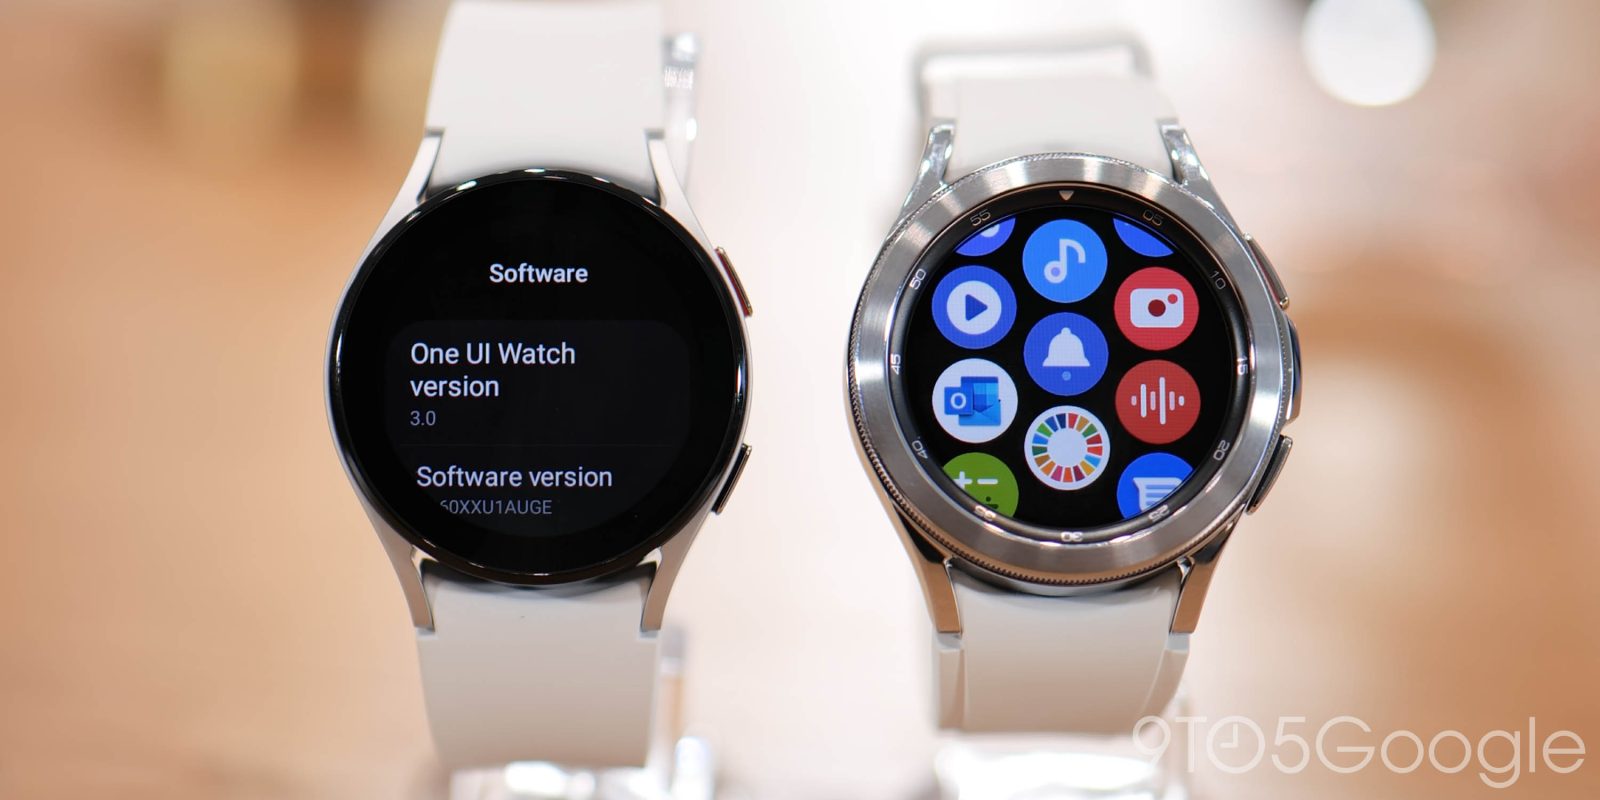 Galaxy Watch 4 series hands-on: Wear OS reinvigorated - 9to5Google